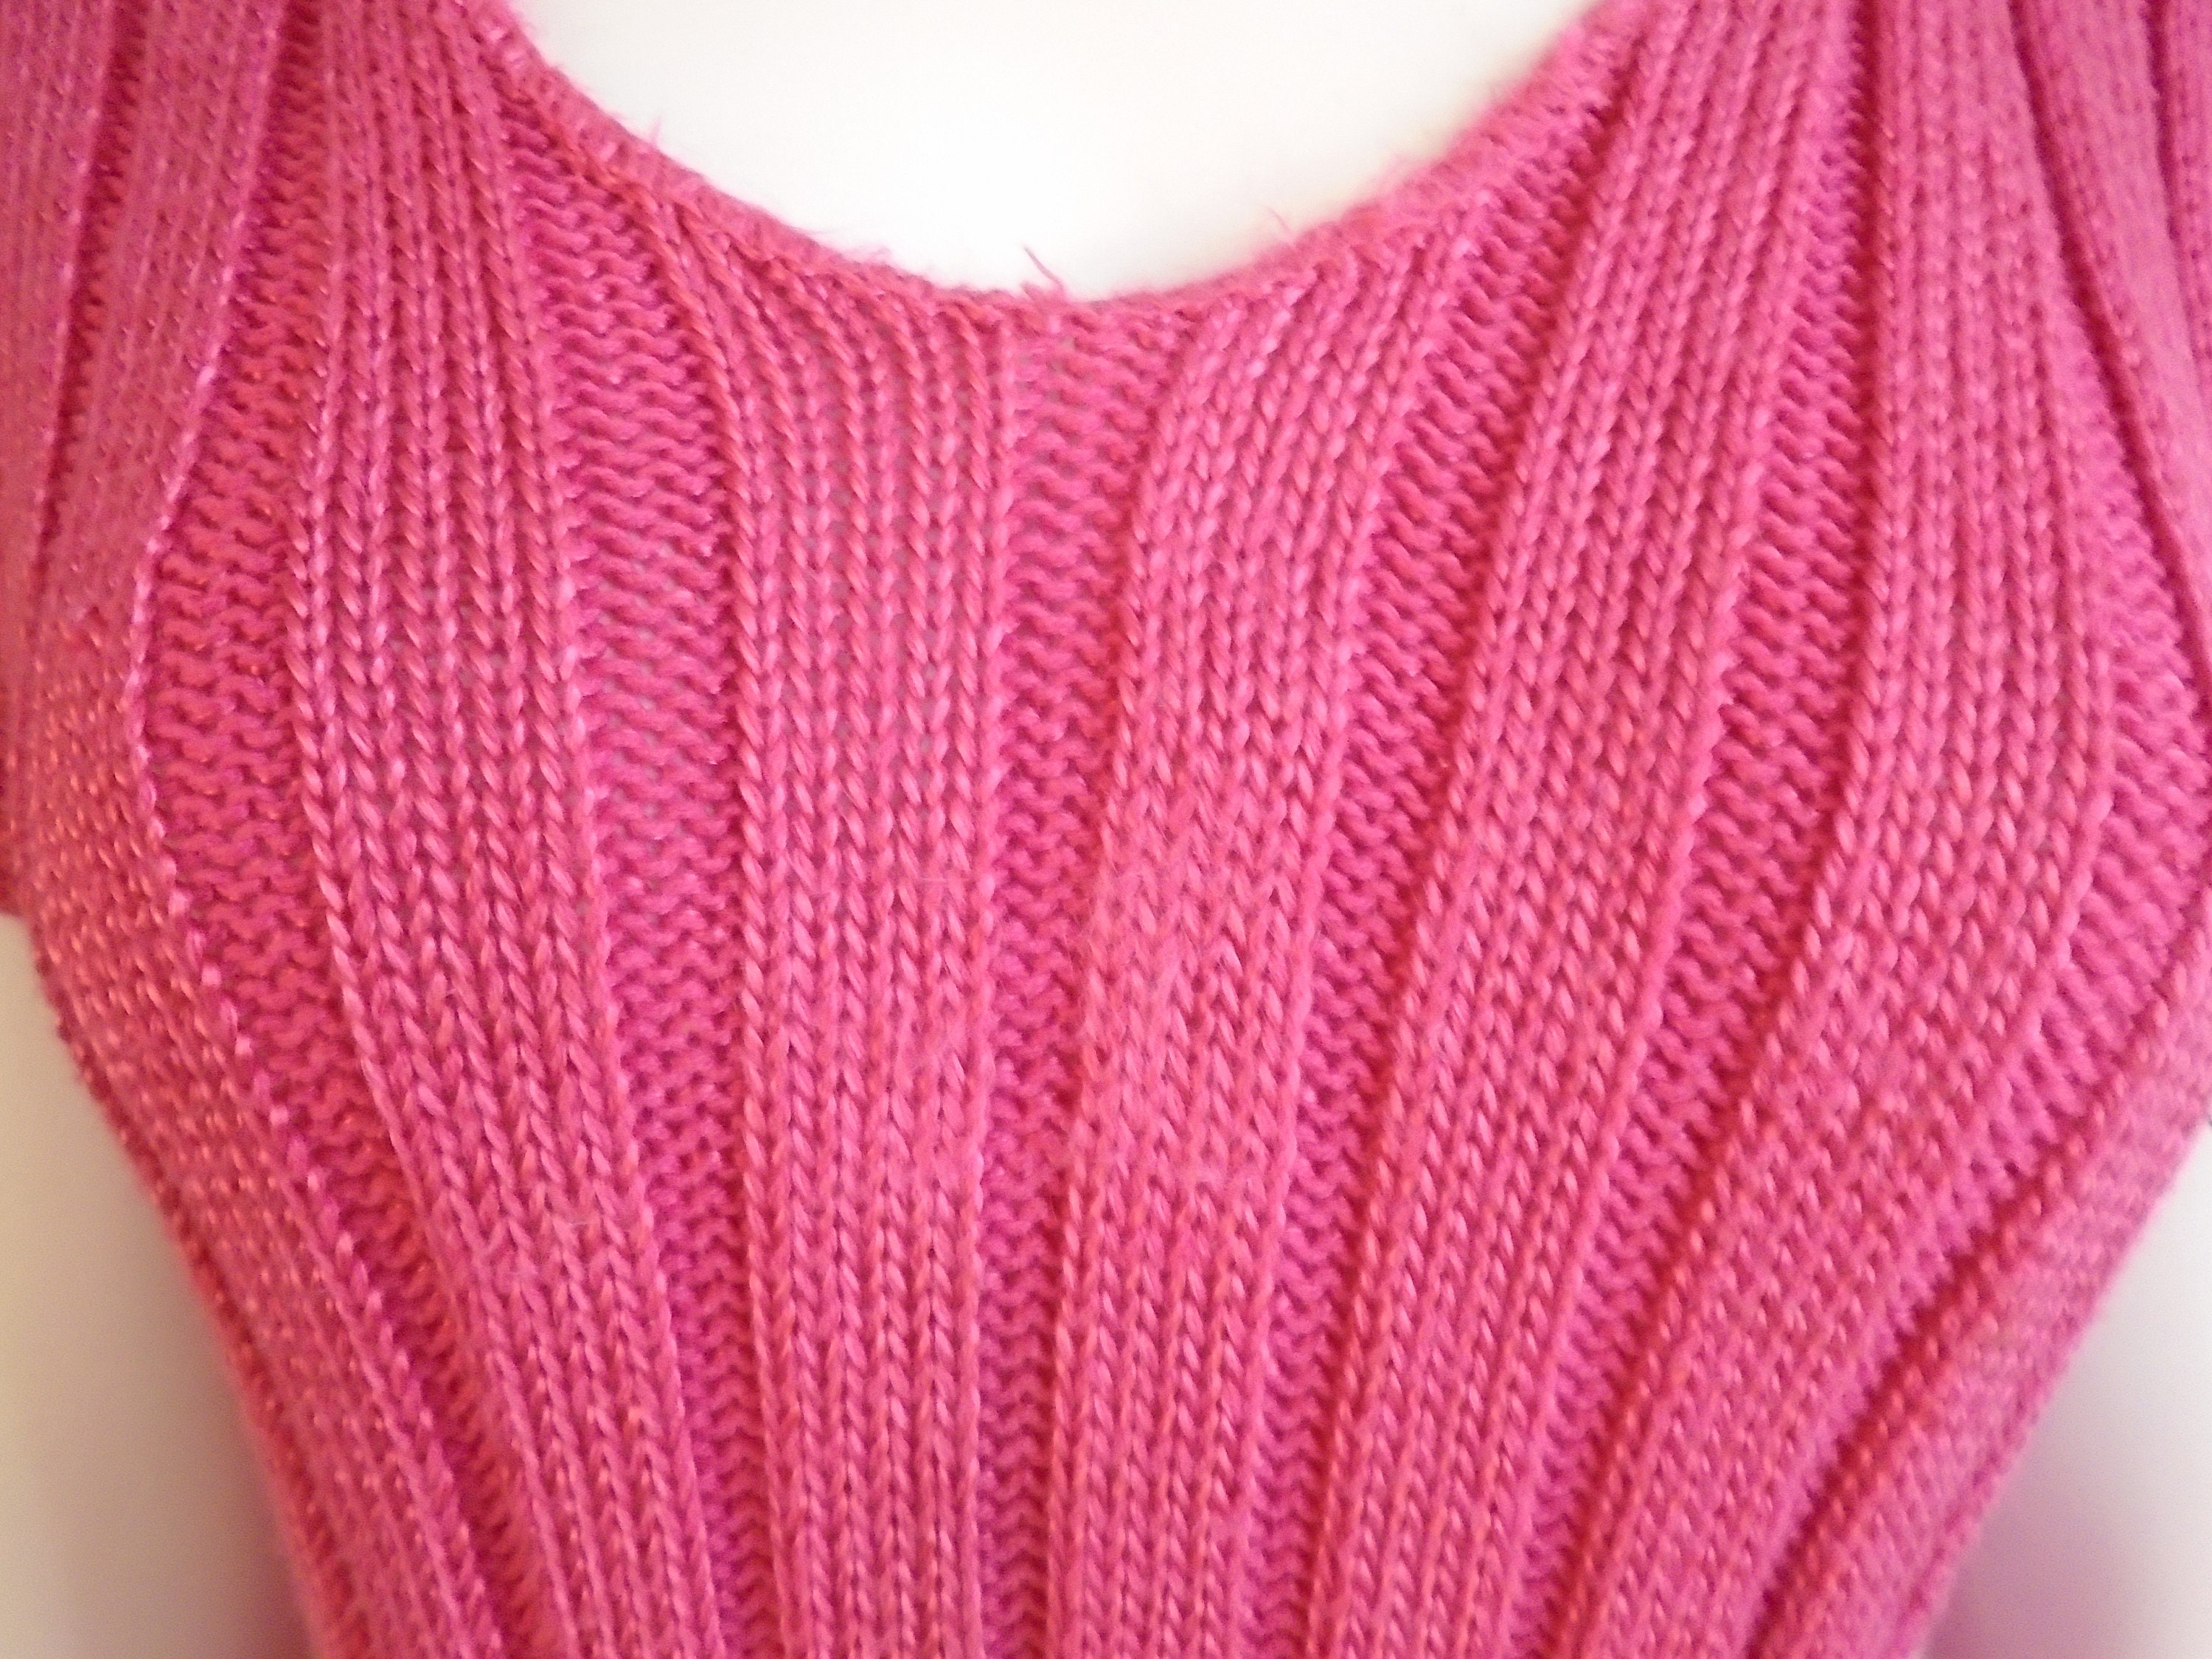 Kleding Dameskleding Sweaters Pullovers Made In The USA Pink Short Sleeve Sweater Vintage 1980’s 